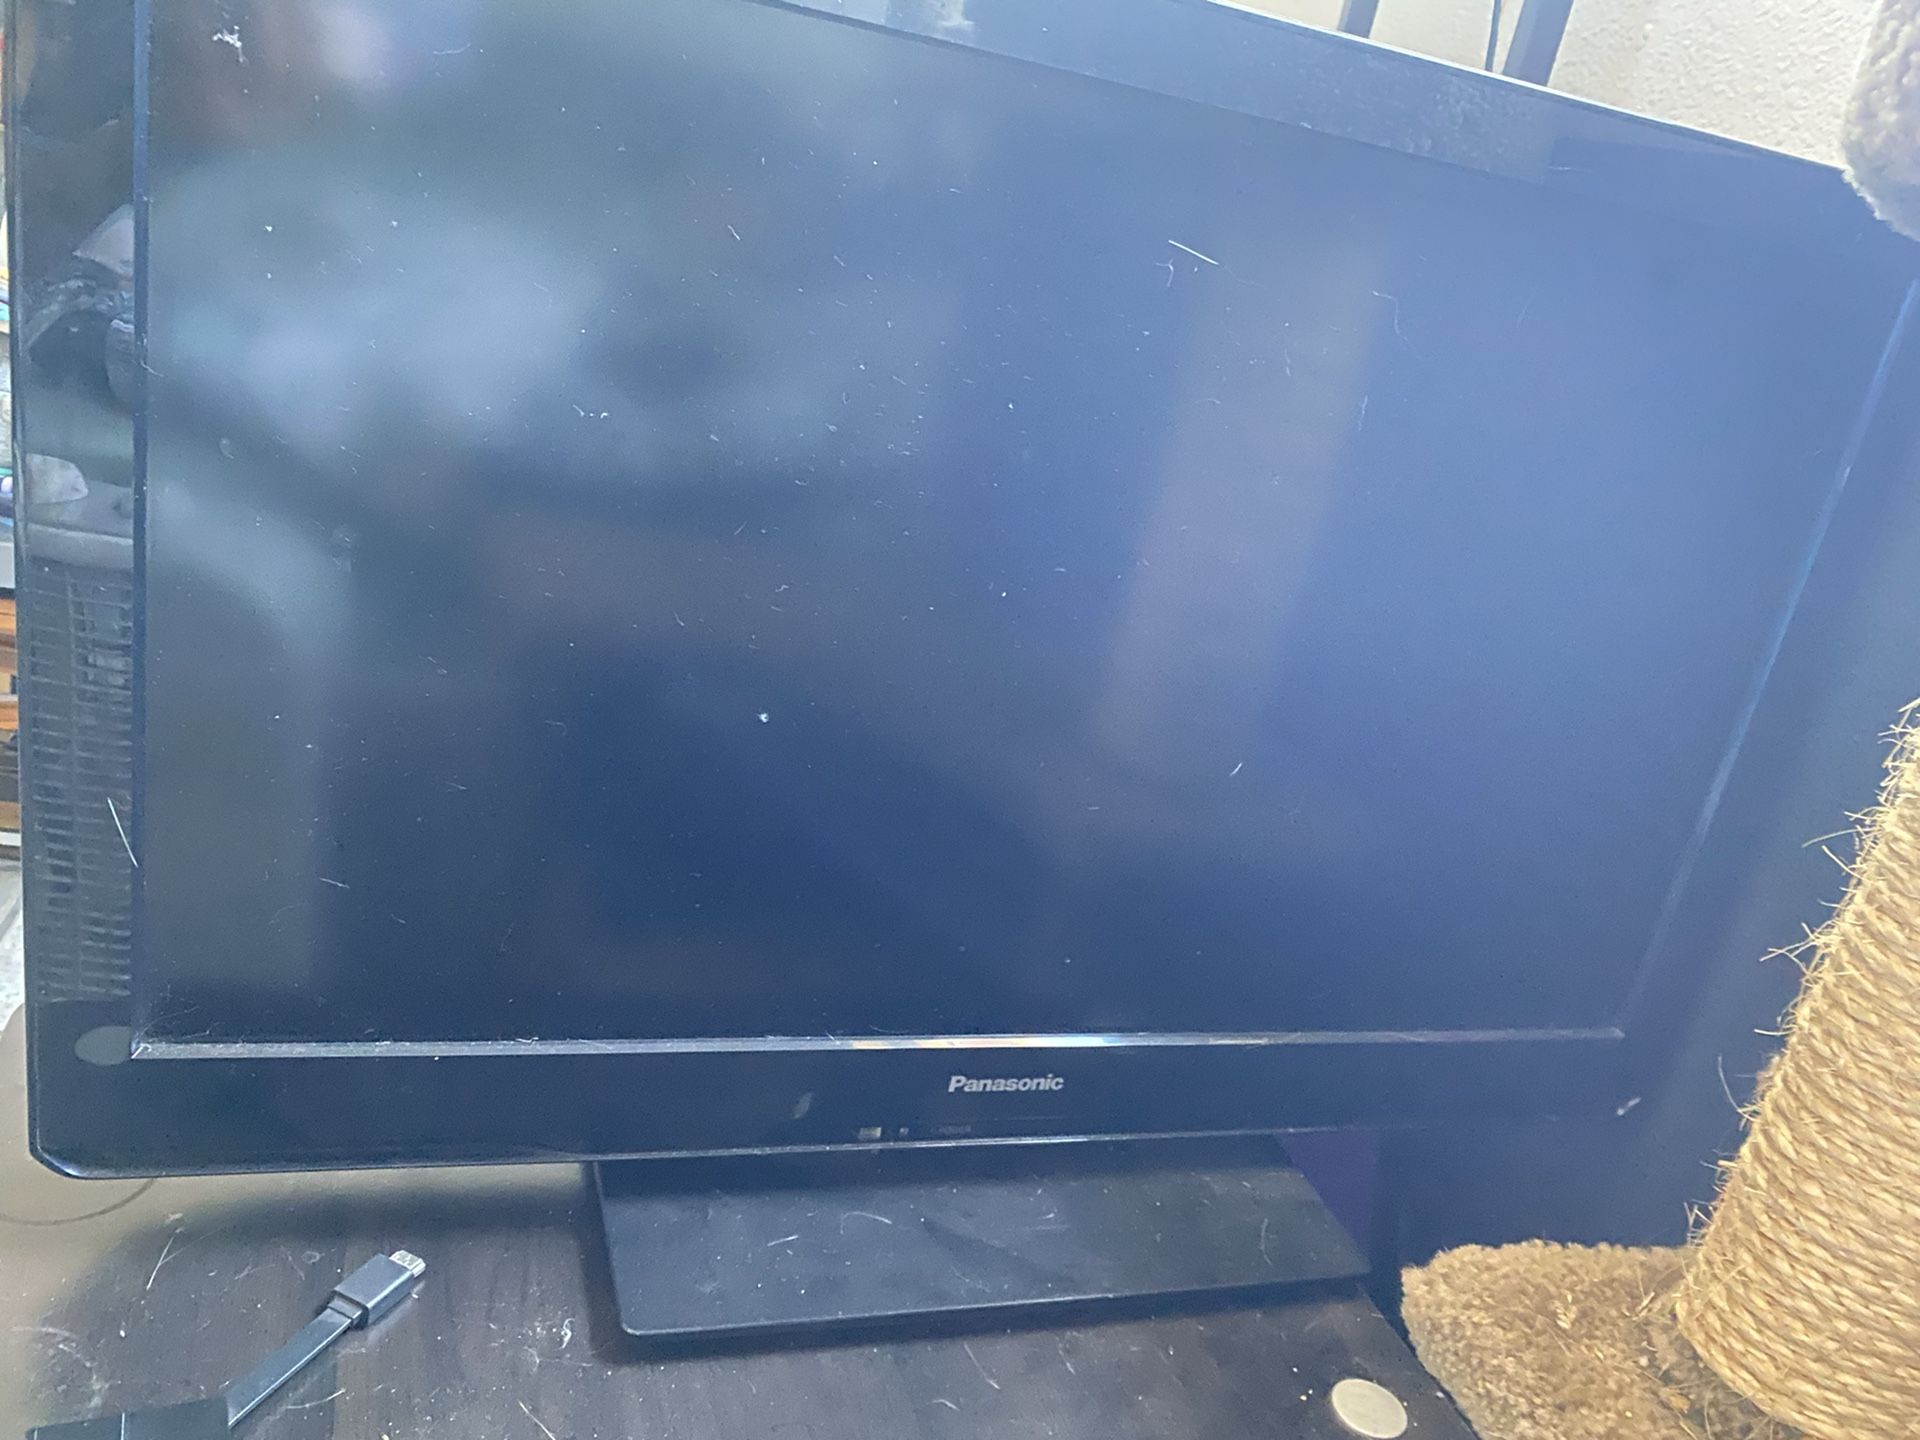 Panasonic TV 32” with Amazon Fire box included